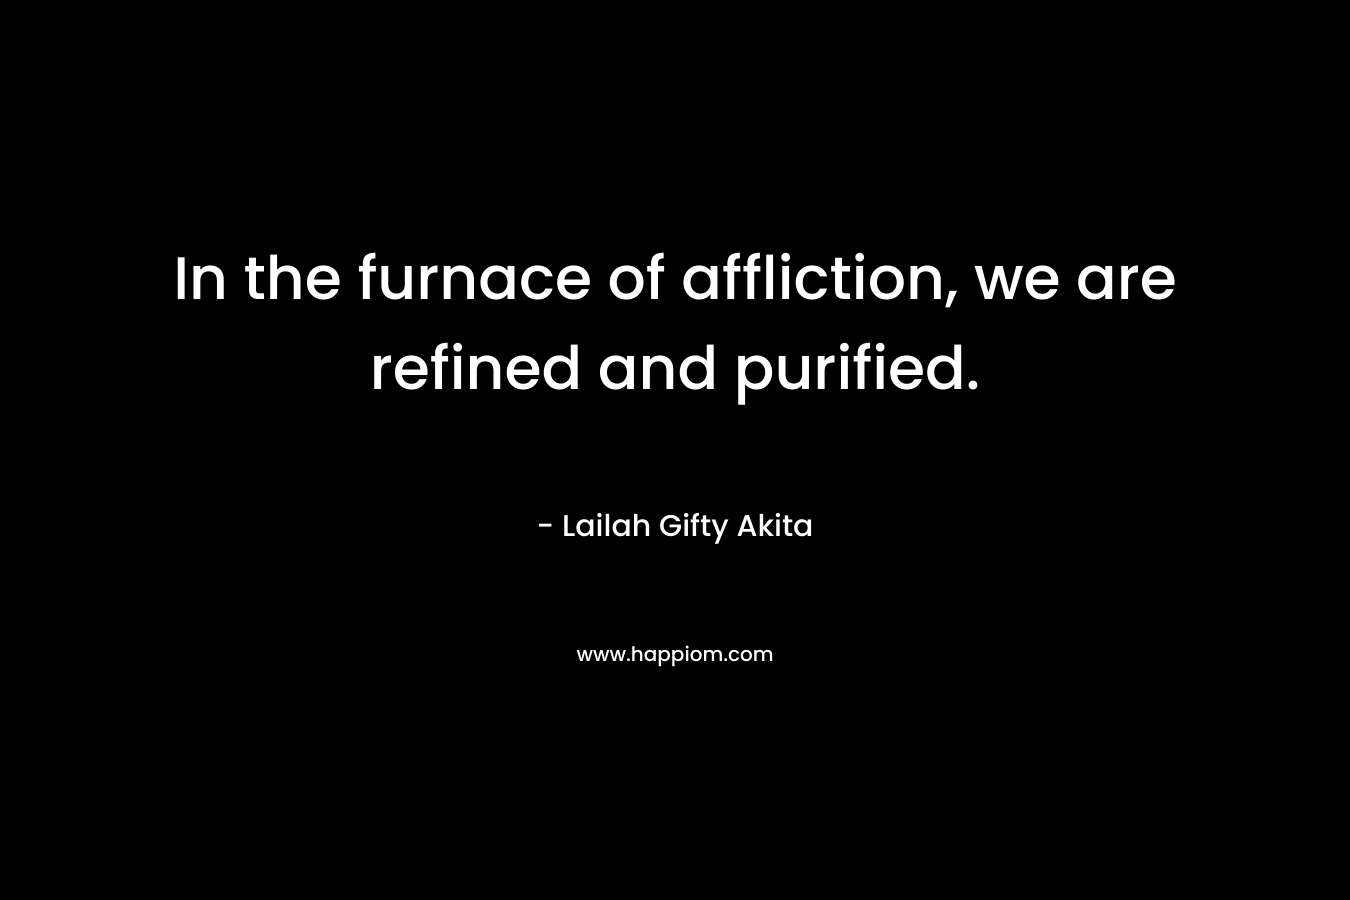 In the furnace of affliction, we are refined and purified.